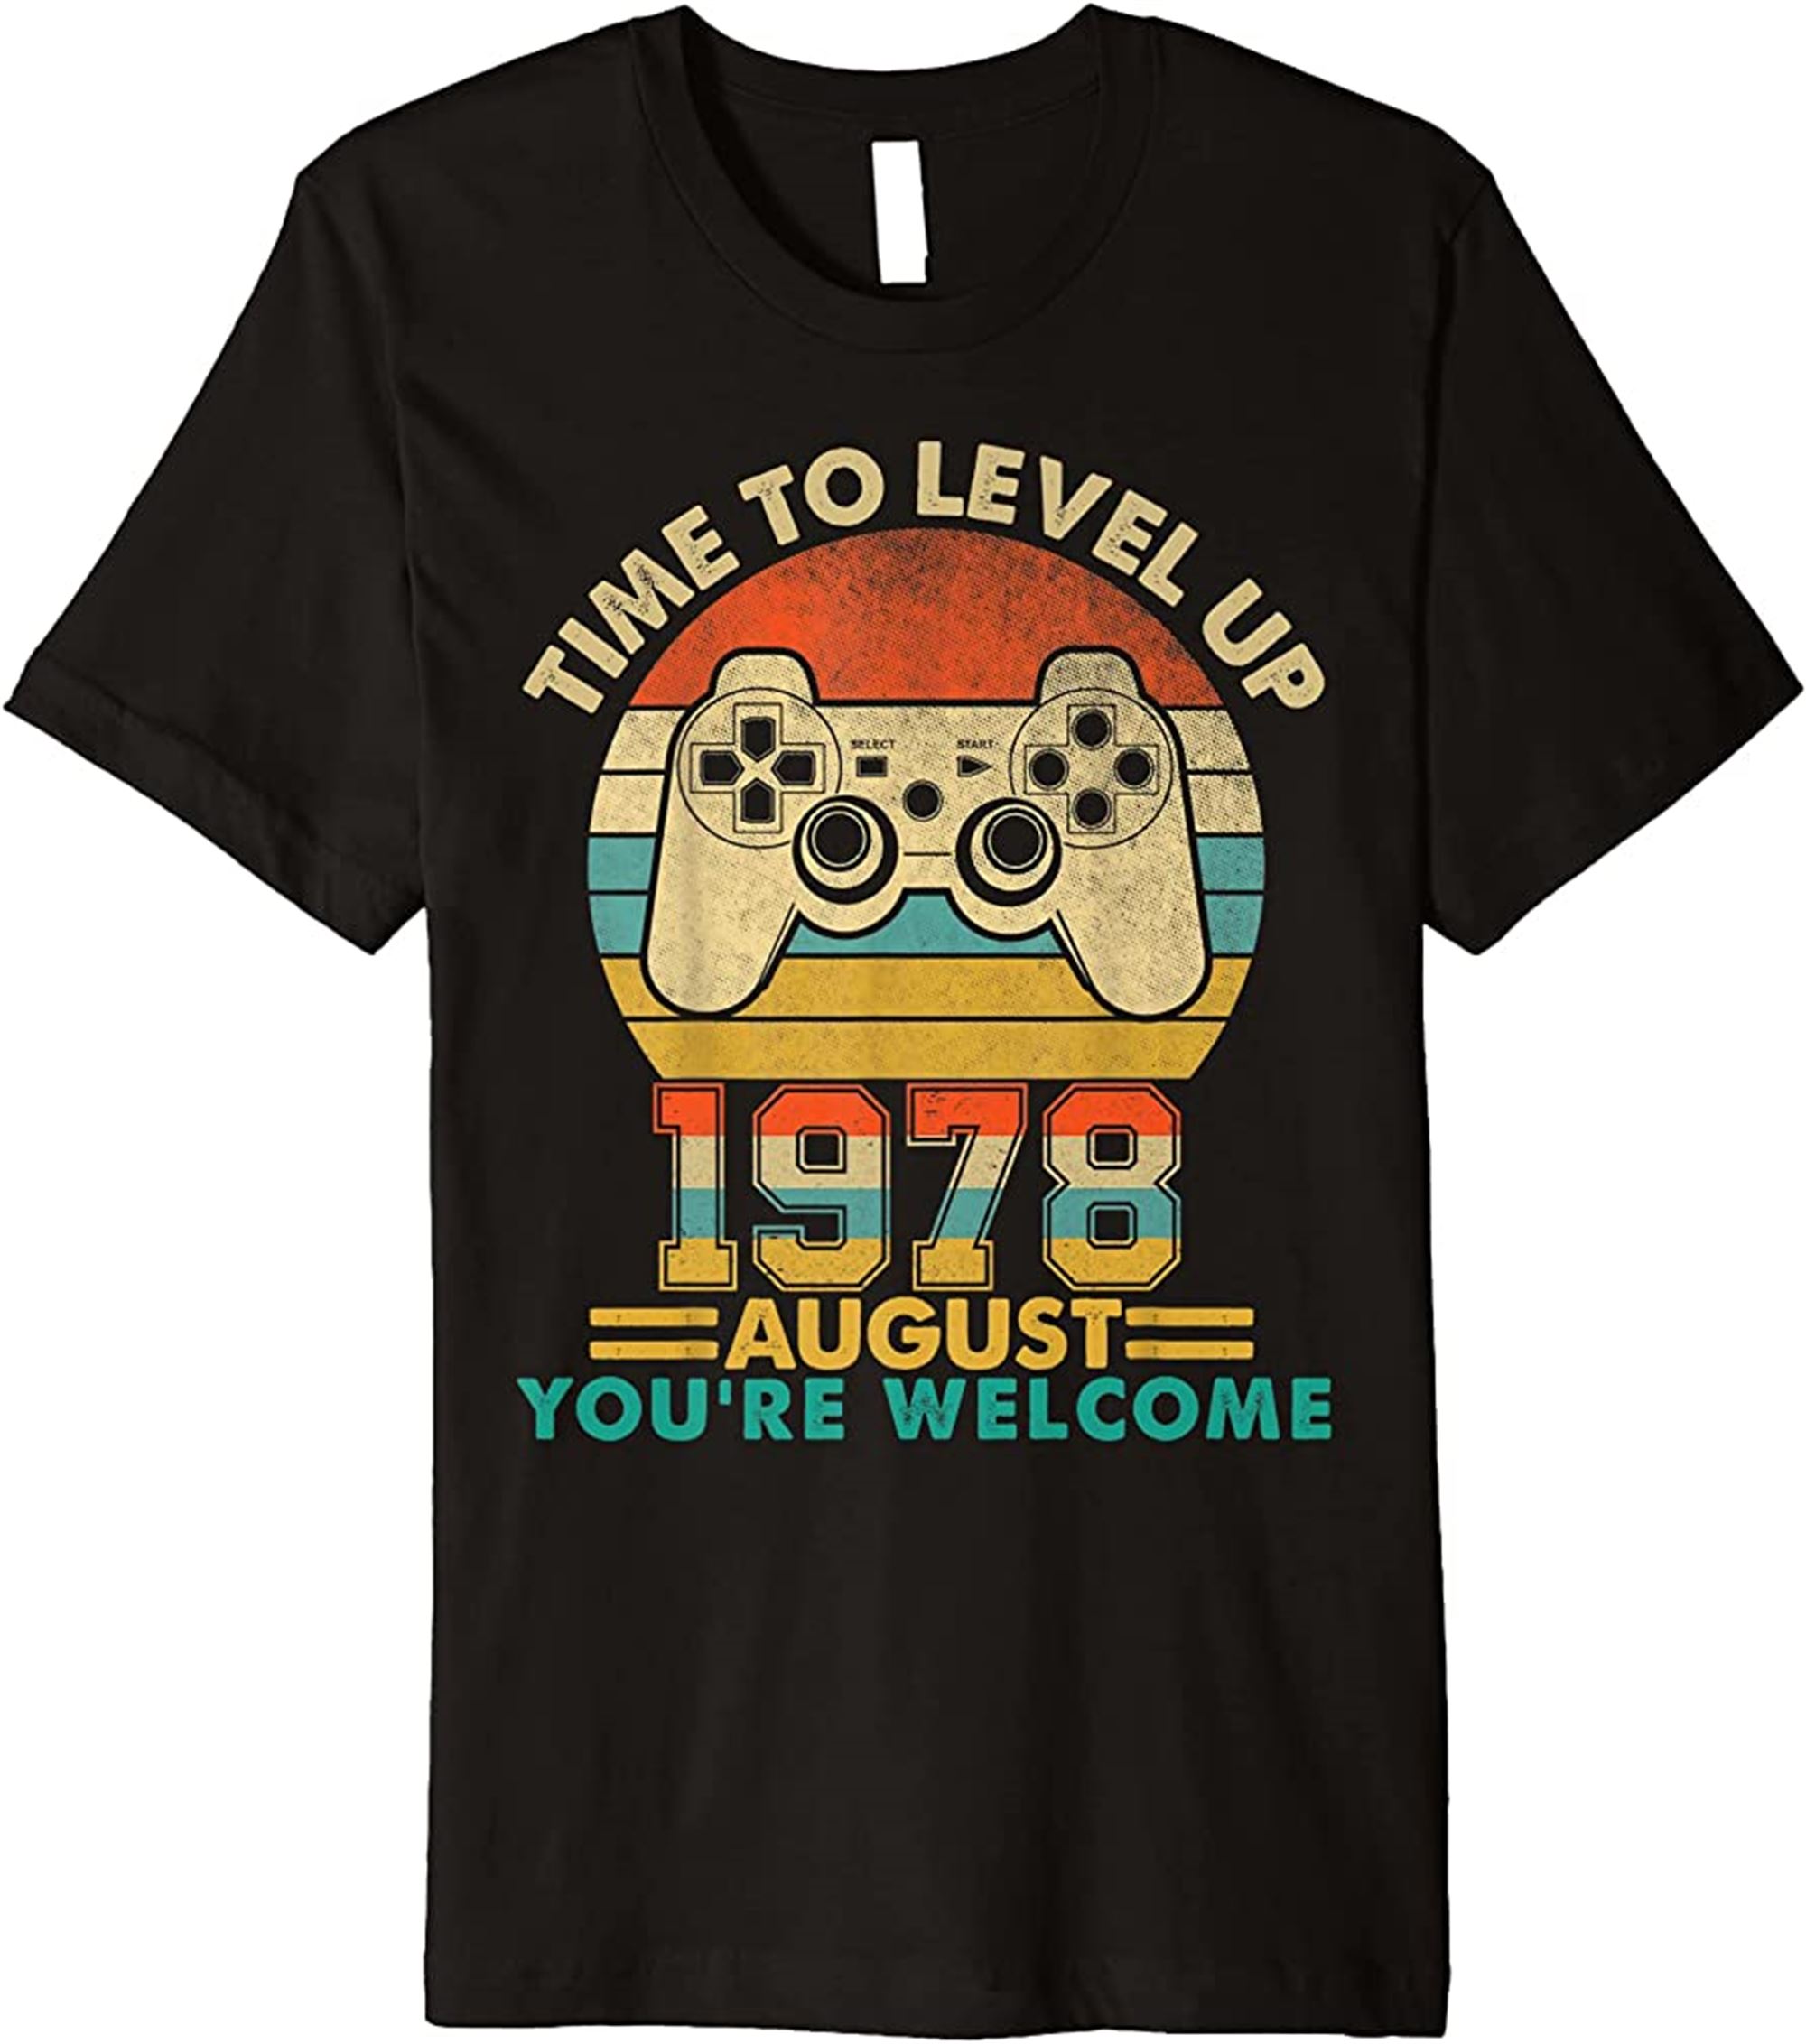 Vintage 1978 August 44 Years Old Video Gamer 44th Birthday Premium T-shirt Full Size Up To 5xl